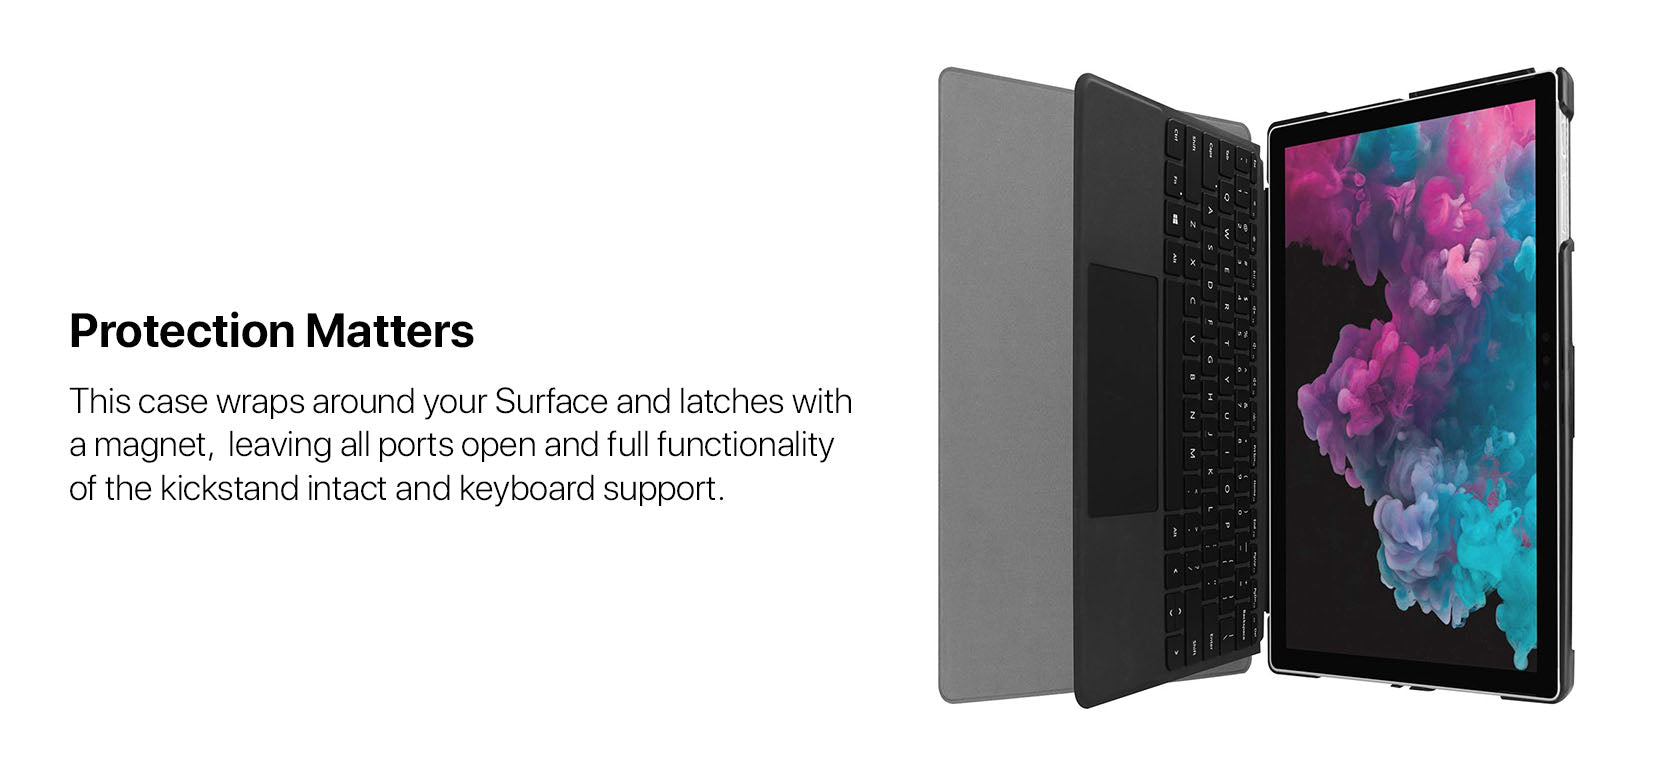 Protection Matters - This case wraps around your Surface and latches with a magnet,  leaving all ports open and full functionality of the kickstand intact and keyboard support.